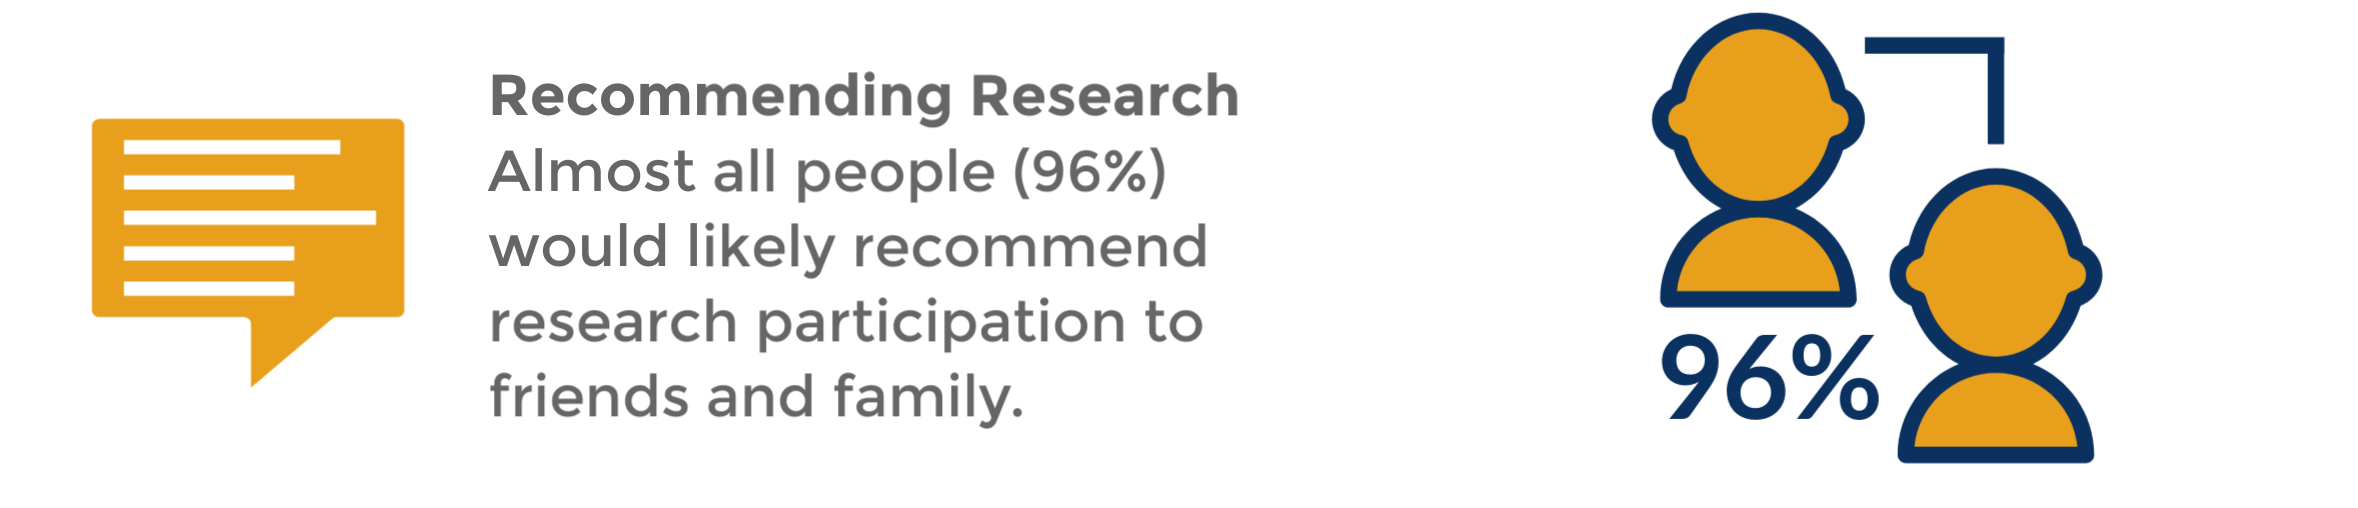 Recommending Research: Almost all people (96%) would likely recommend research participation to friends and family.